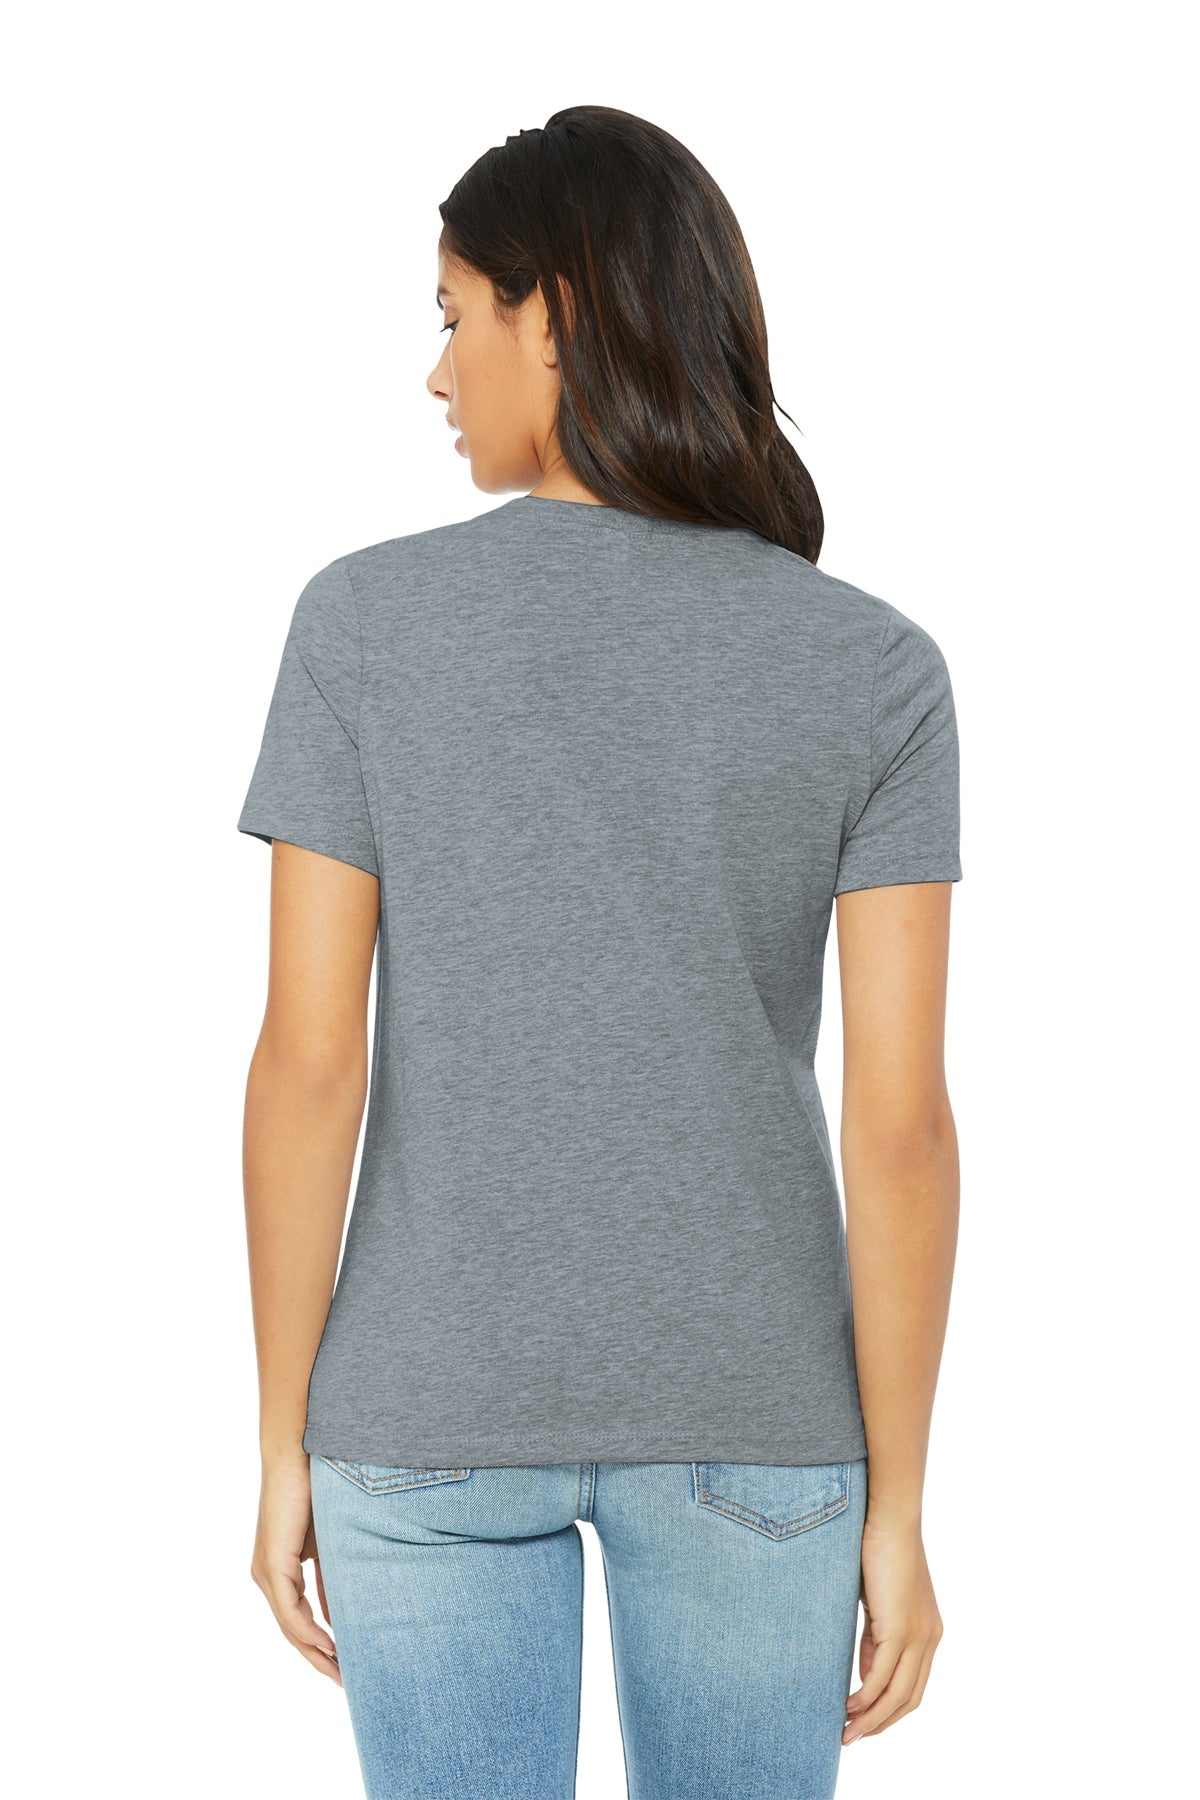 Bella Canvas Womens Relaxed T-Shirt, Athletic Heather